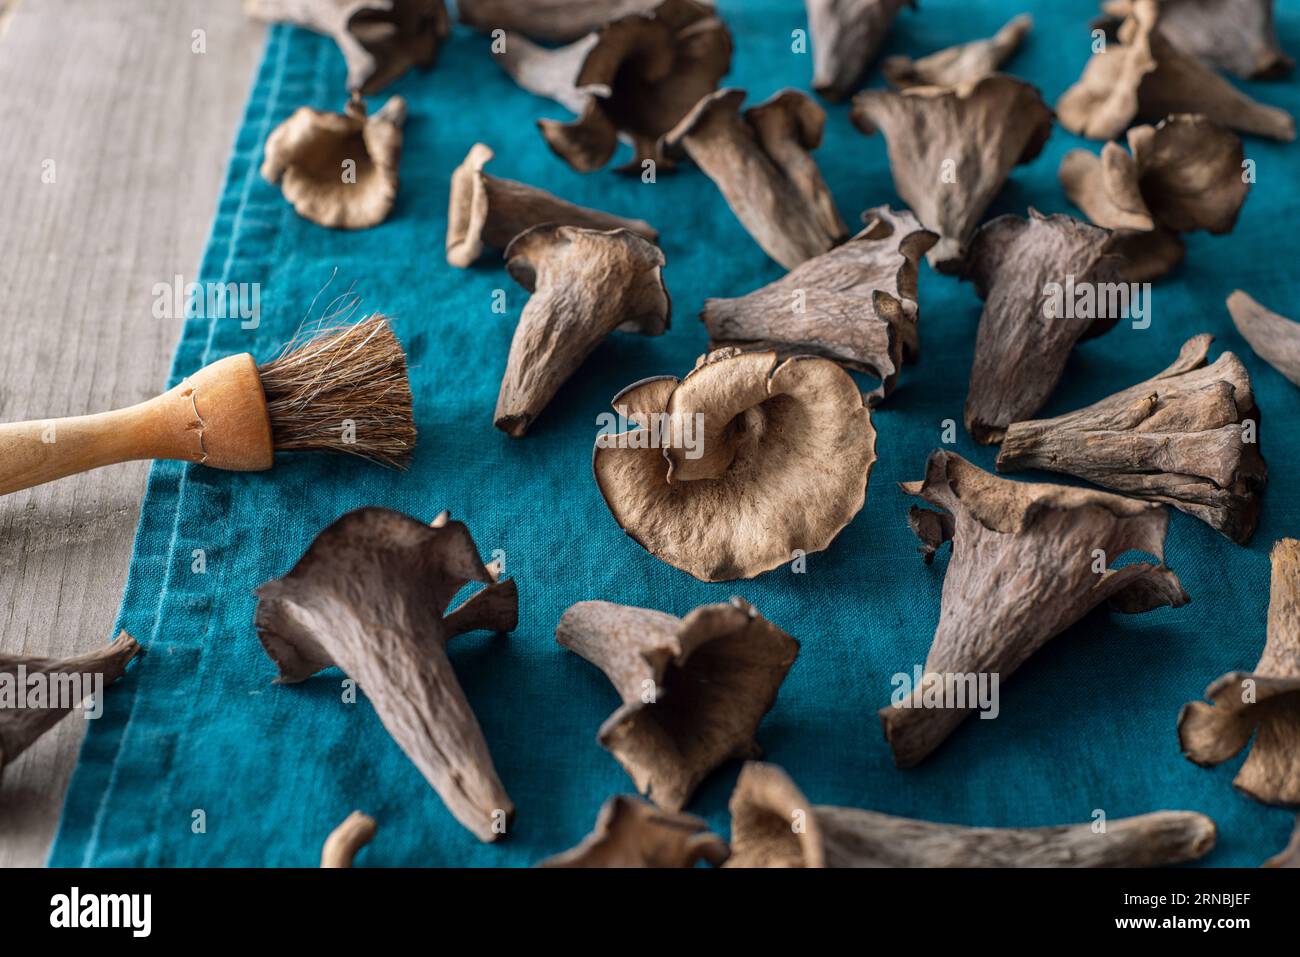 Freshly foraged black trumpet mushrooms spread out on a linen towel Stock Photo